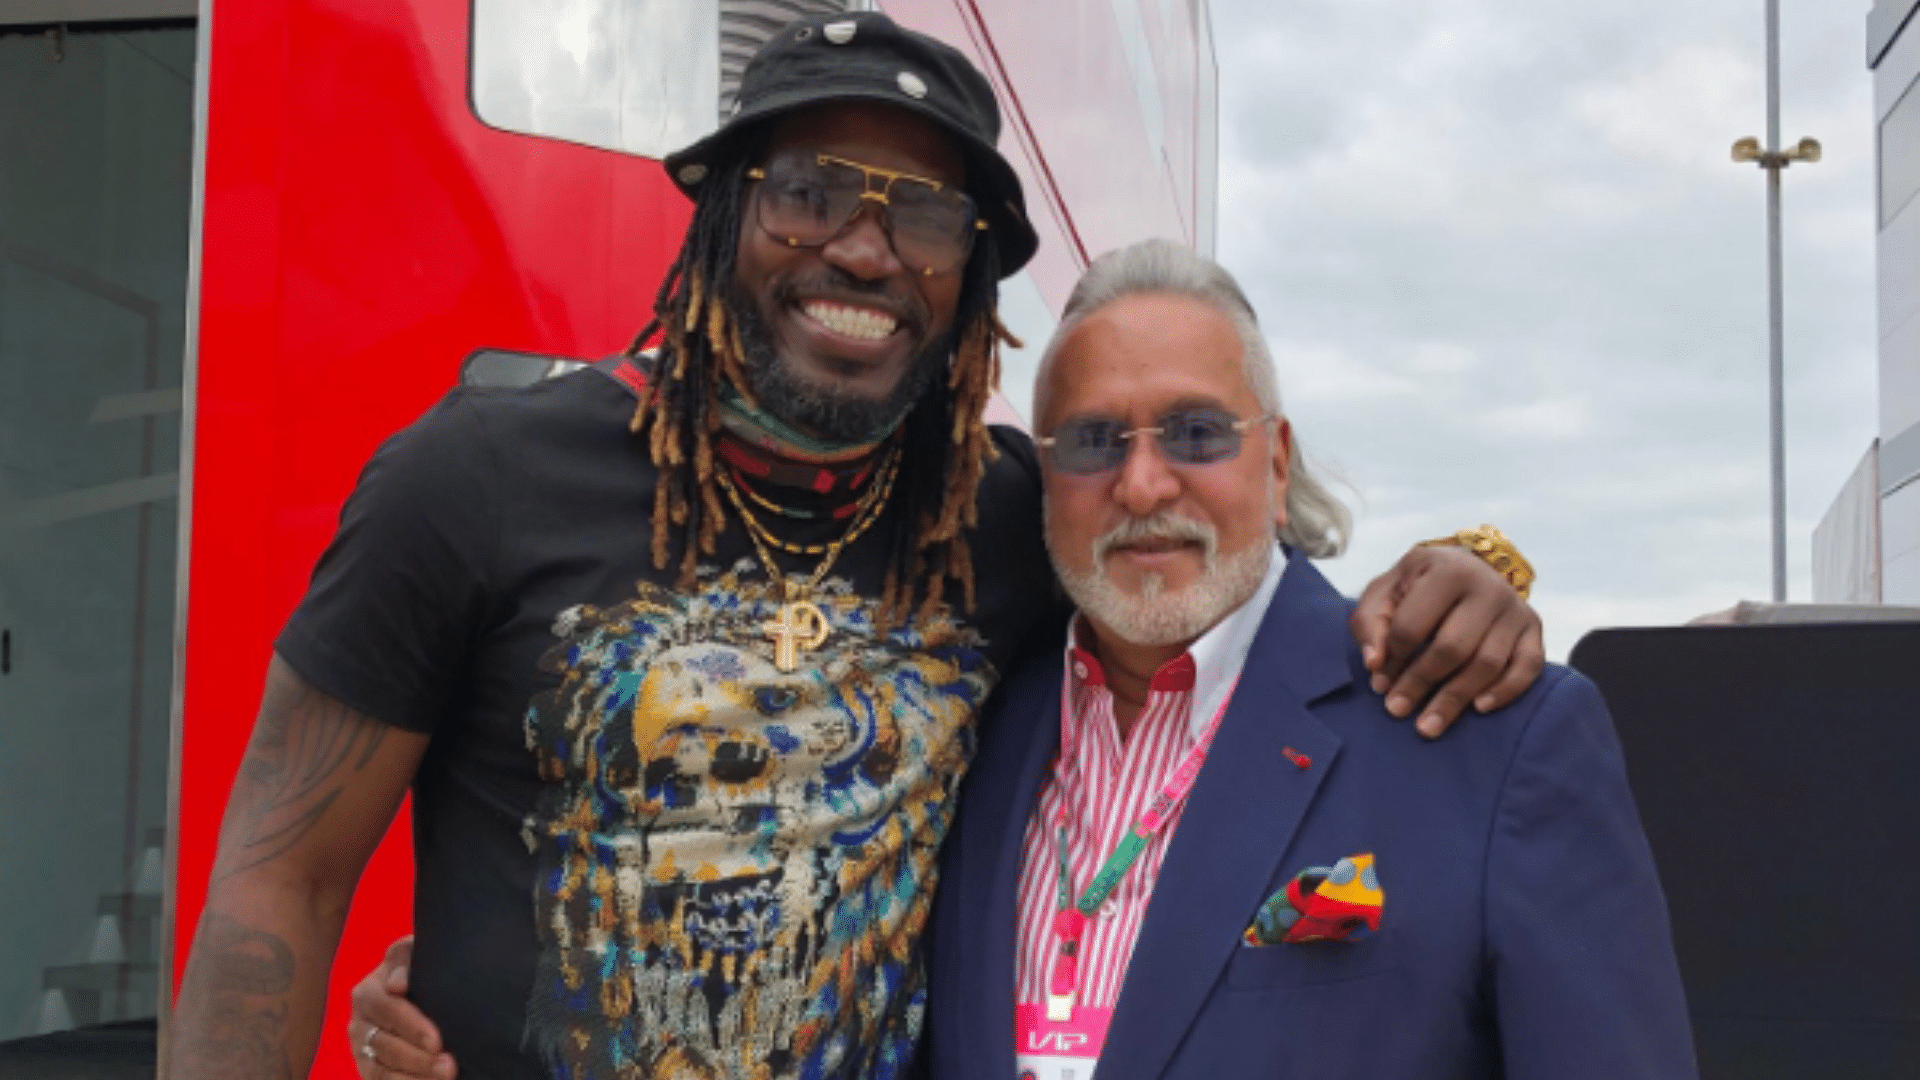 Twitter users troll liquor tycoon Vijay Mallya after West Indies batsman Chris Gayle posted a picture with him.